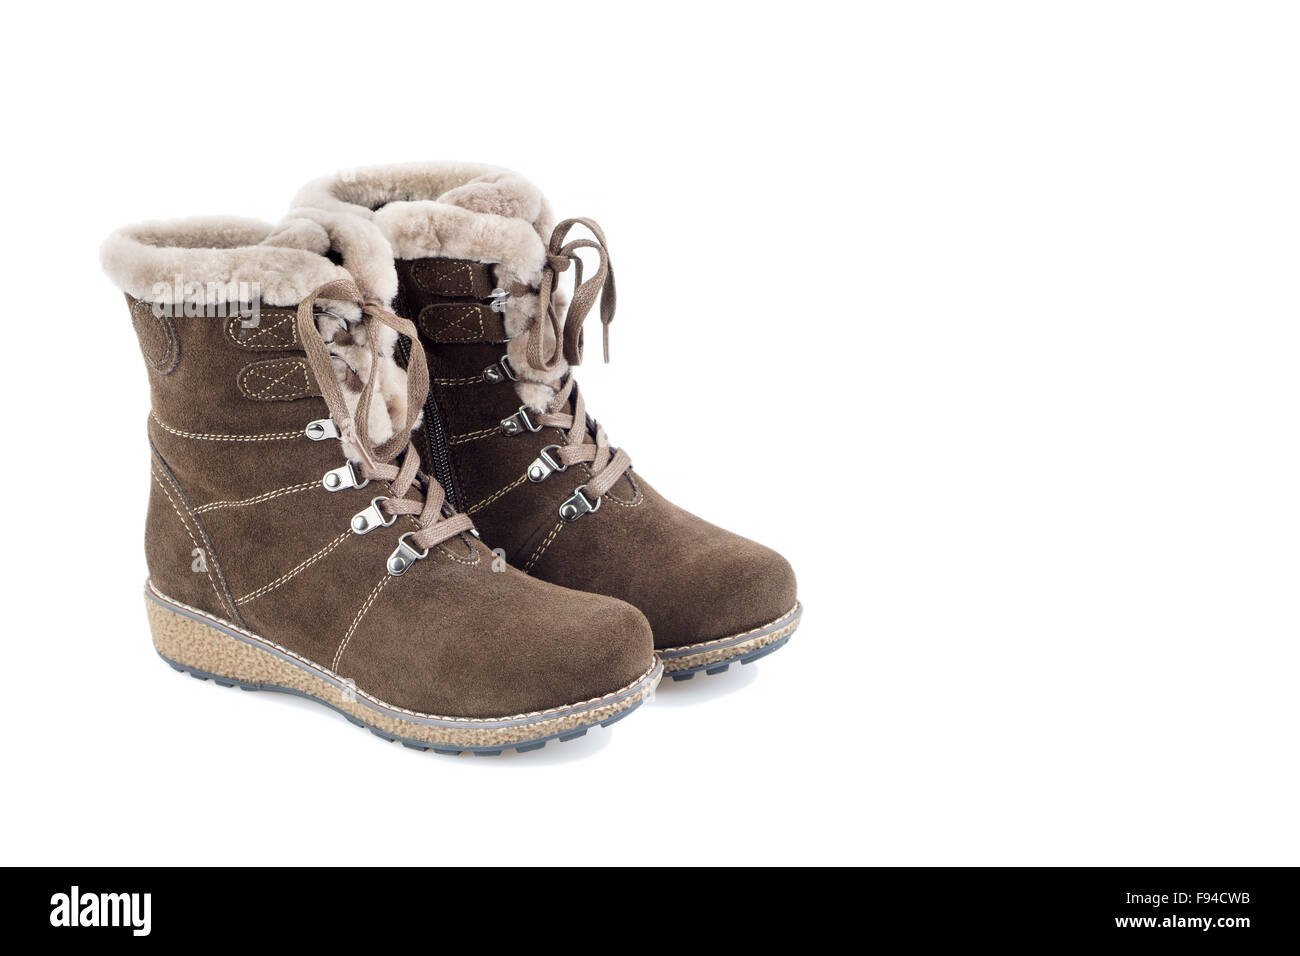 Woman's suede winter boots on white Stock Photo